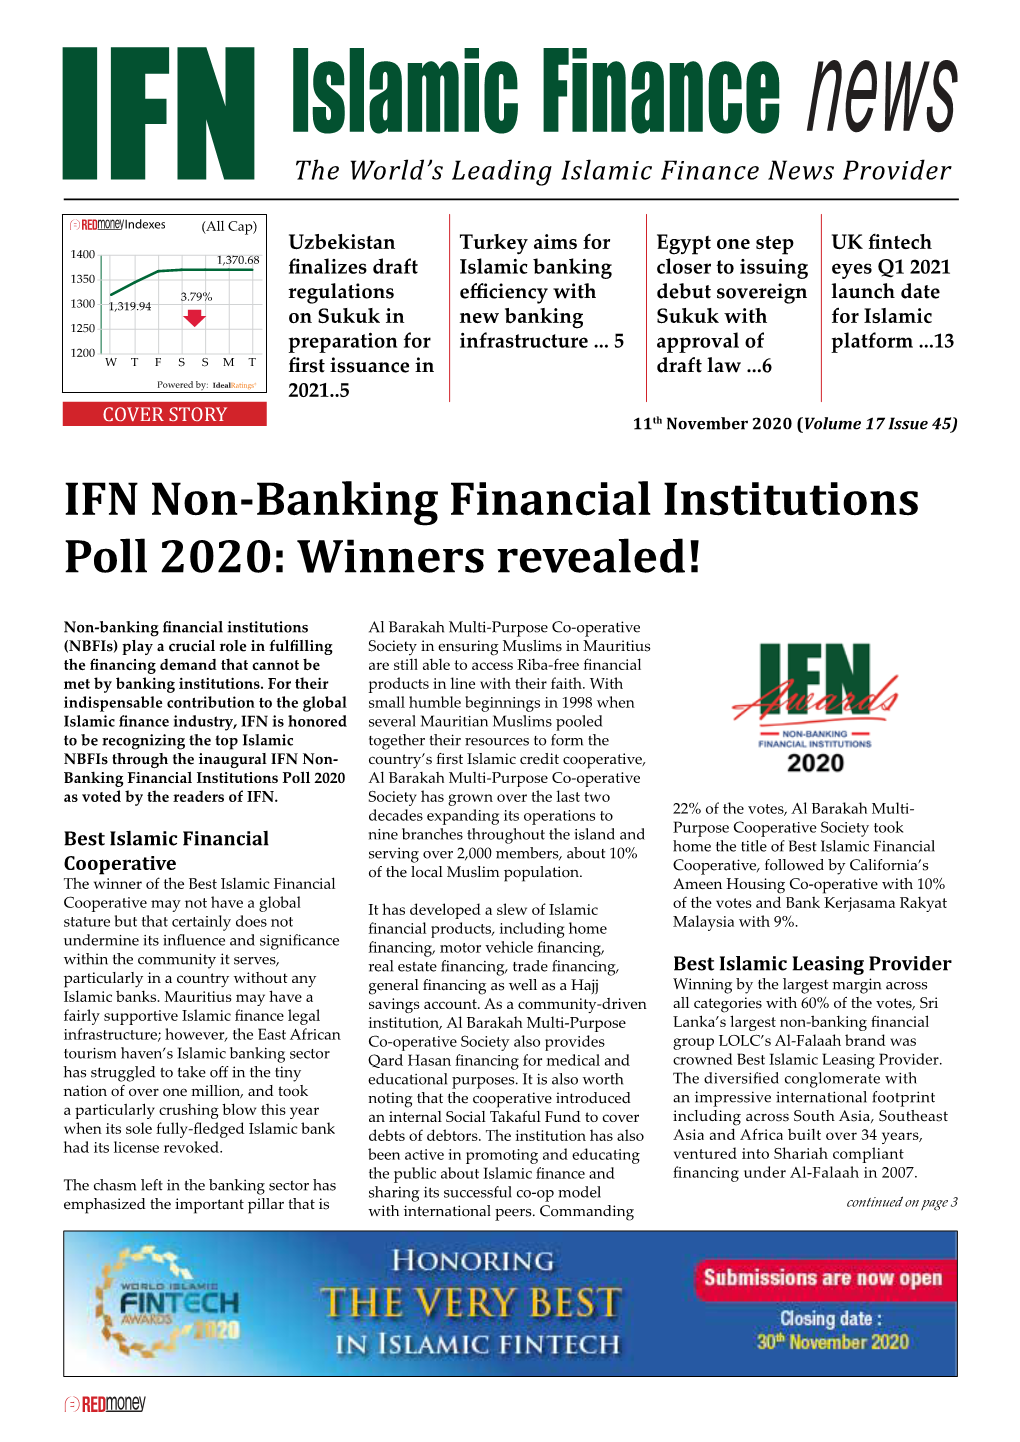 IFN Non-Banking Financial Institutions Poll 2020: Winners Revealed!